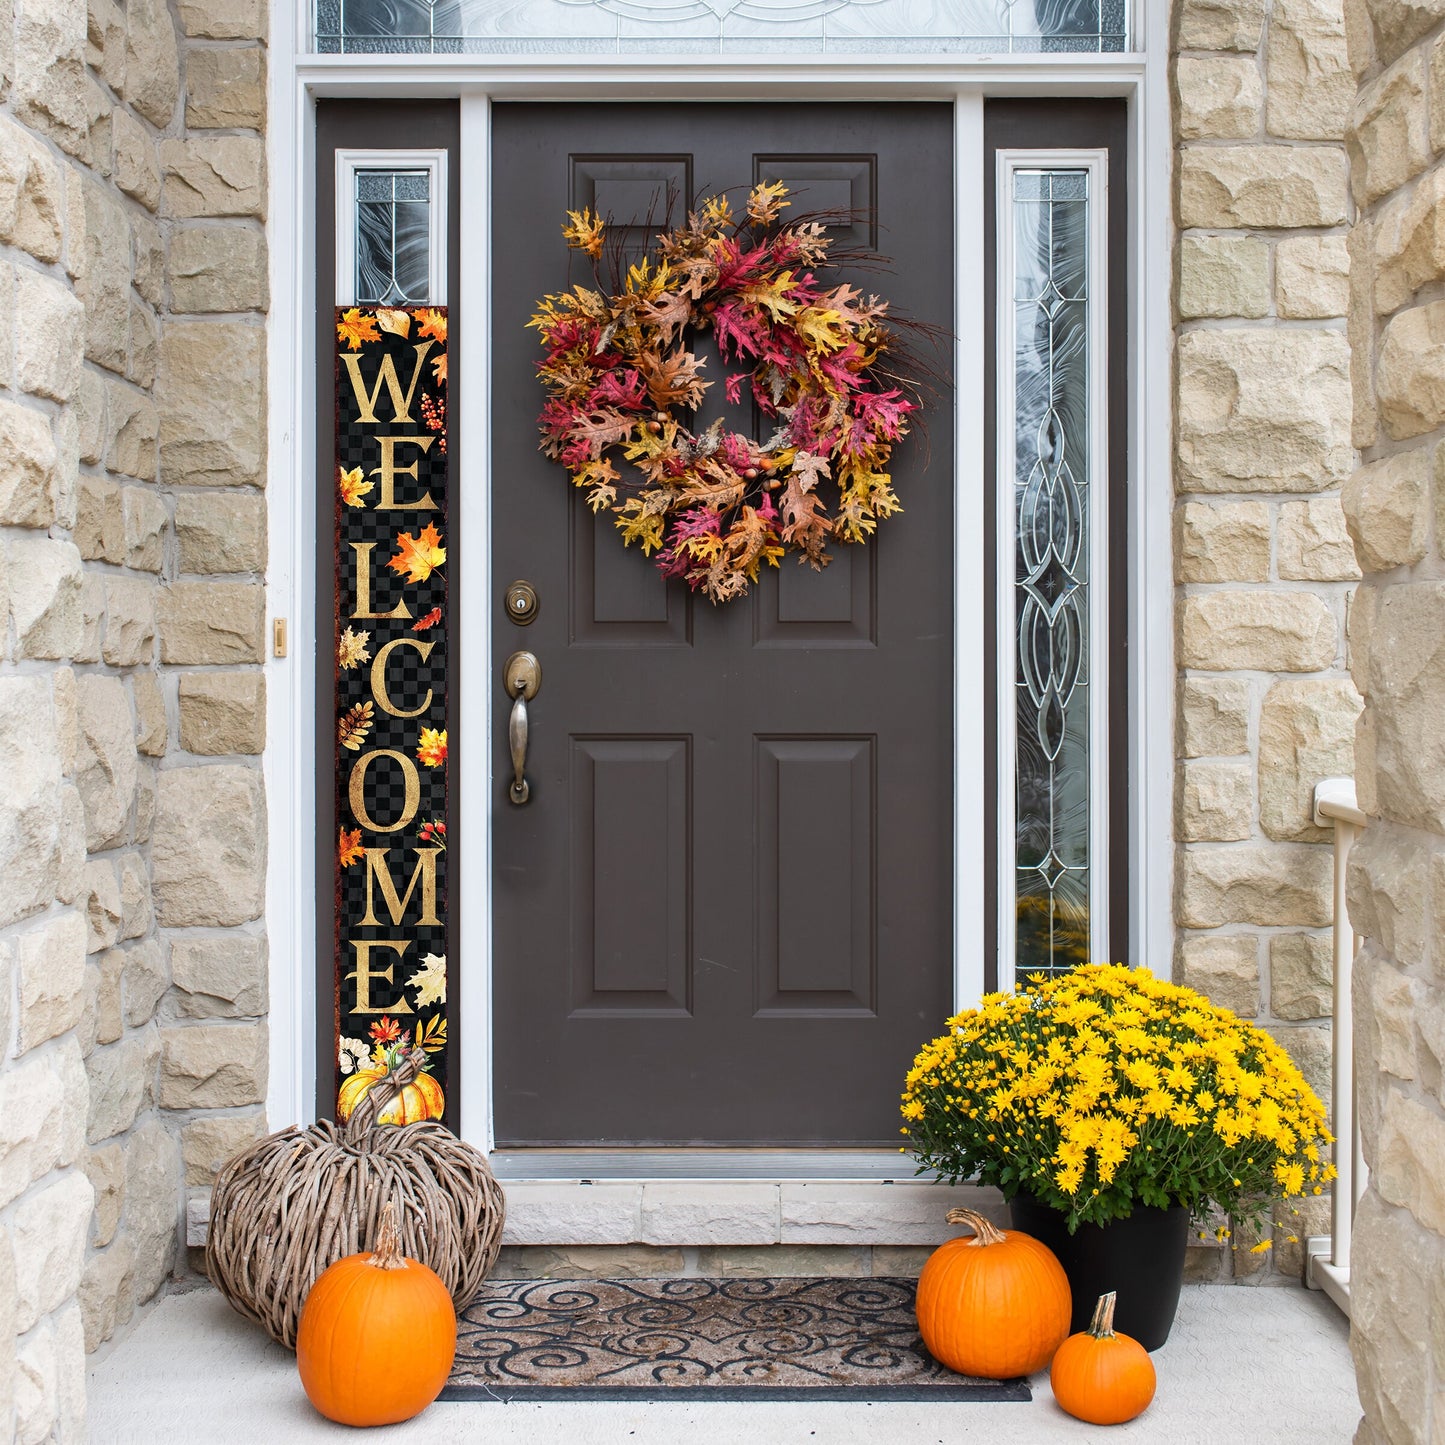 72in Fall Welcome Porch Sign - Foldable Front Porch Fall Welcome Sign with Vintage Autumn Decoration, Modern Farmhouse Entryway Porch Decor